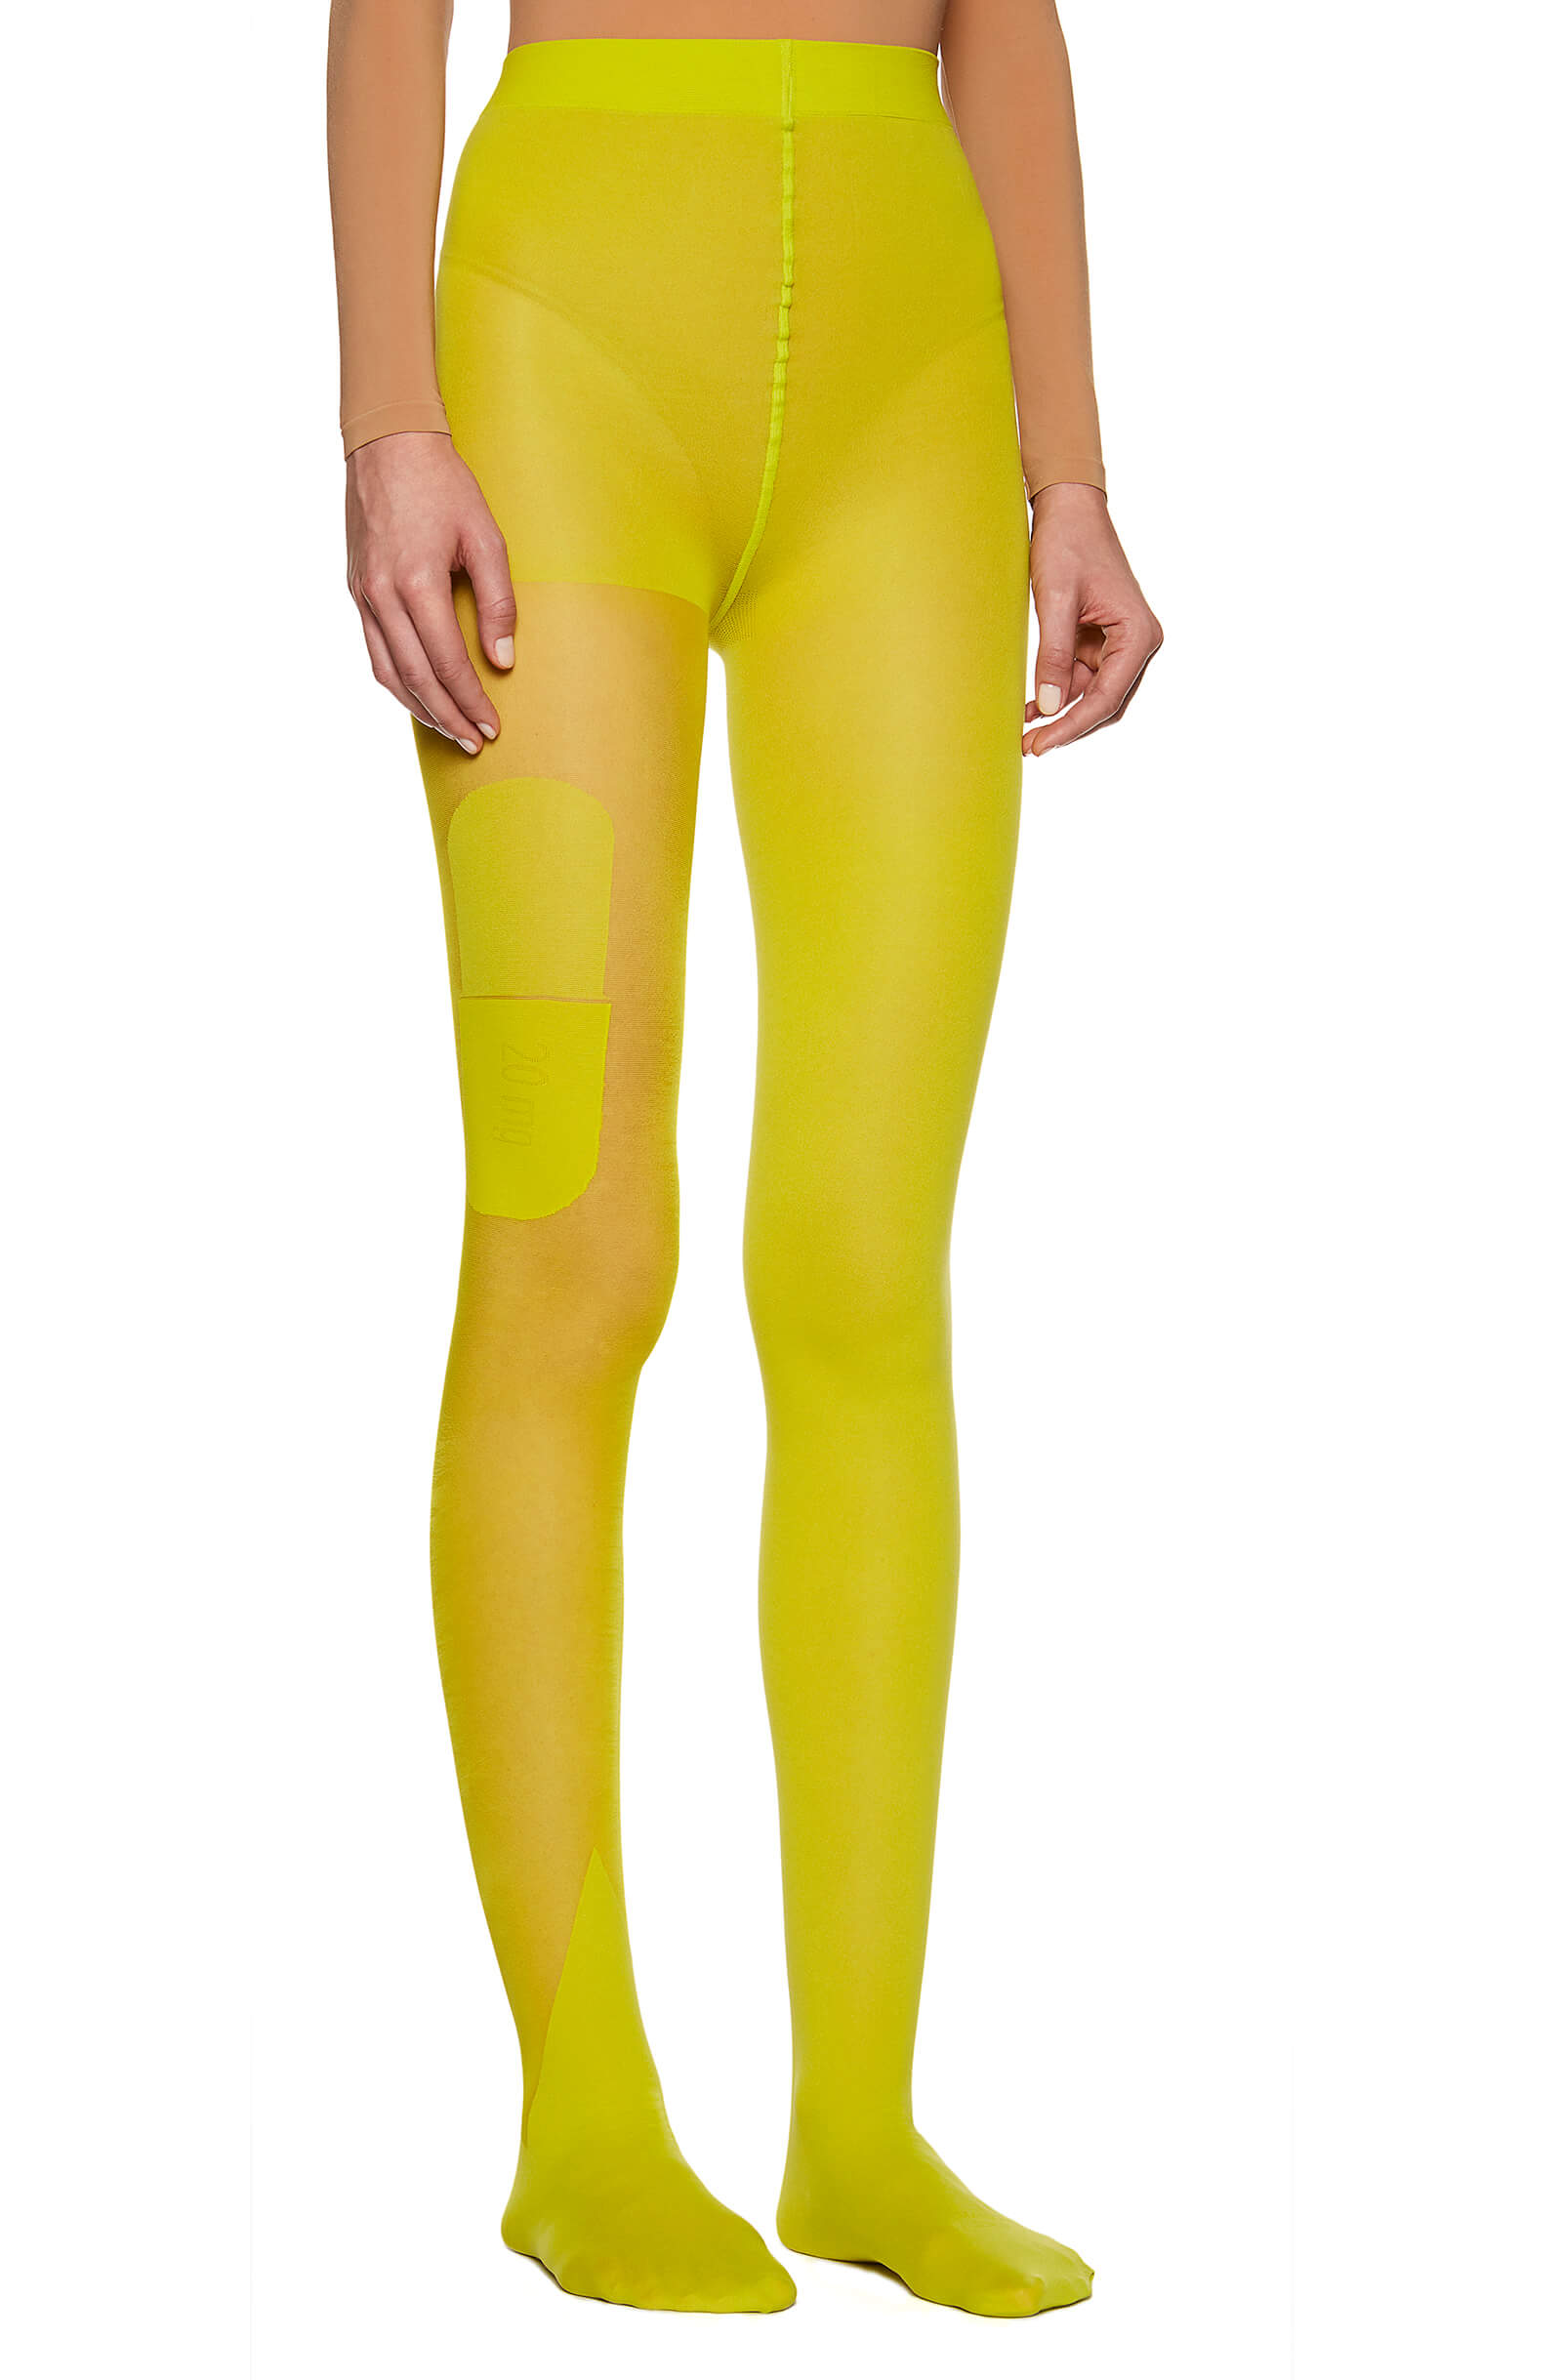 Base layer long tights in color yellow